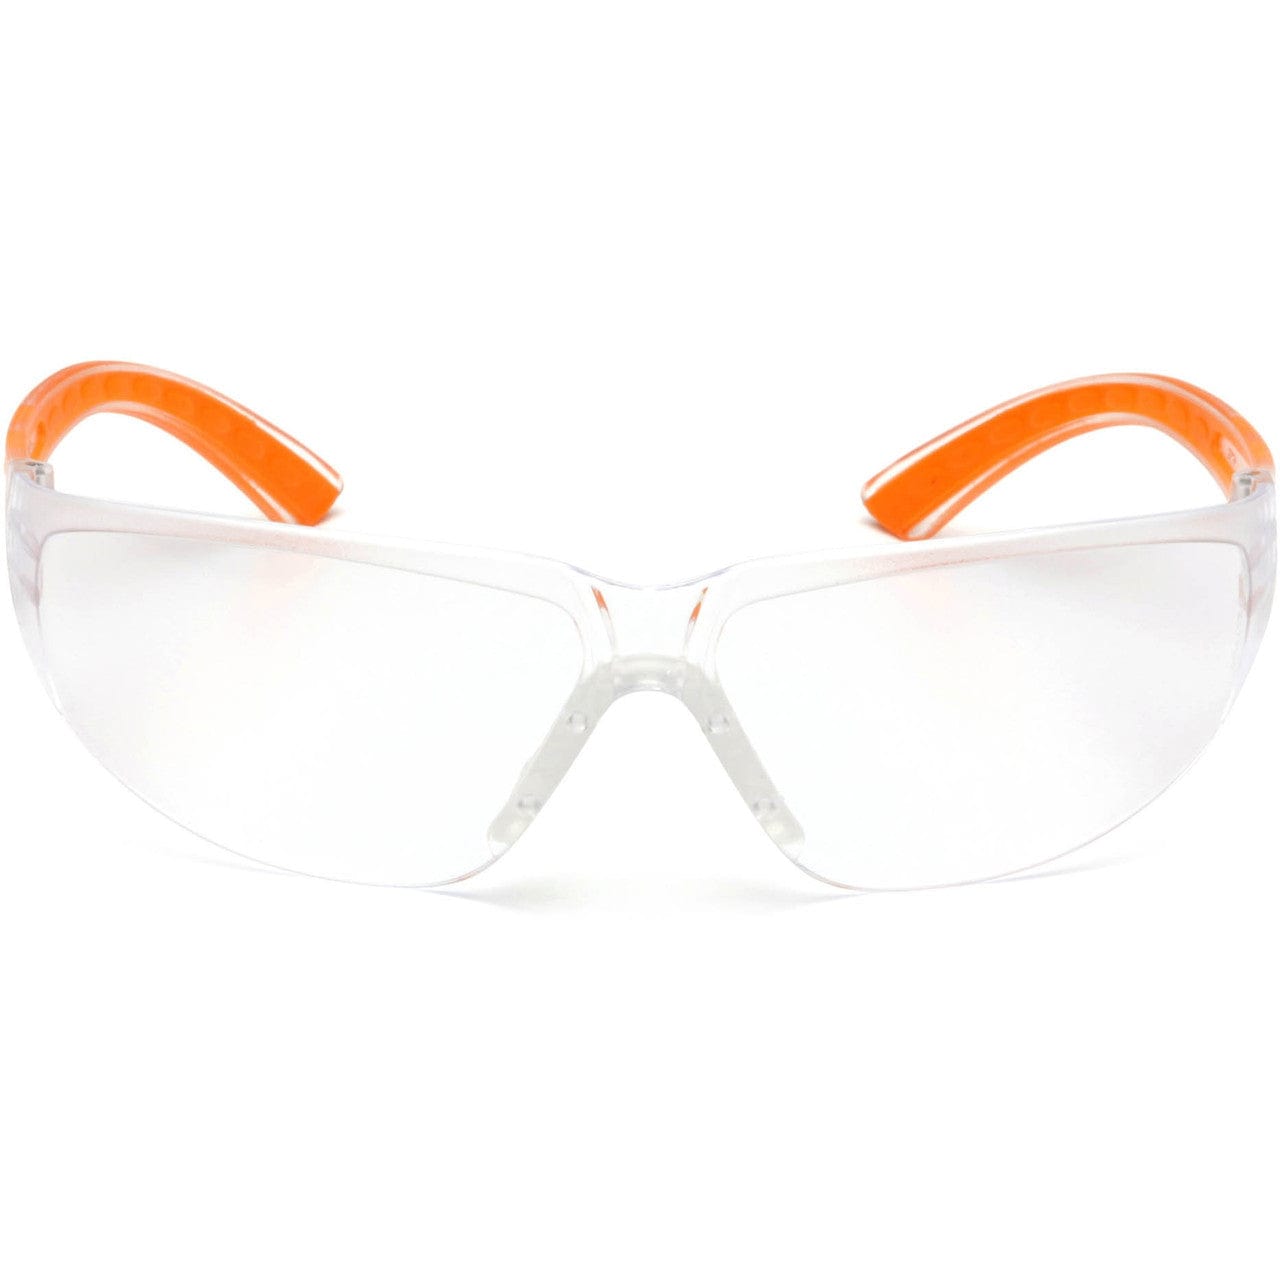 Pyramex Cortez Safety Glasses Orange Temples Clear Lens SO3610S Front